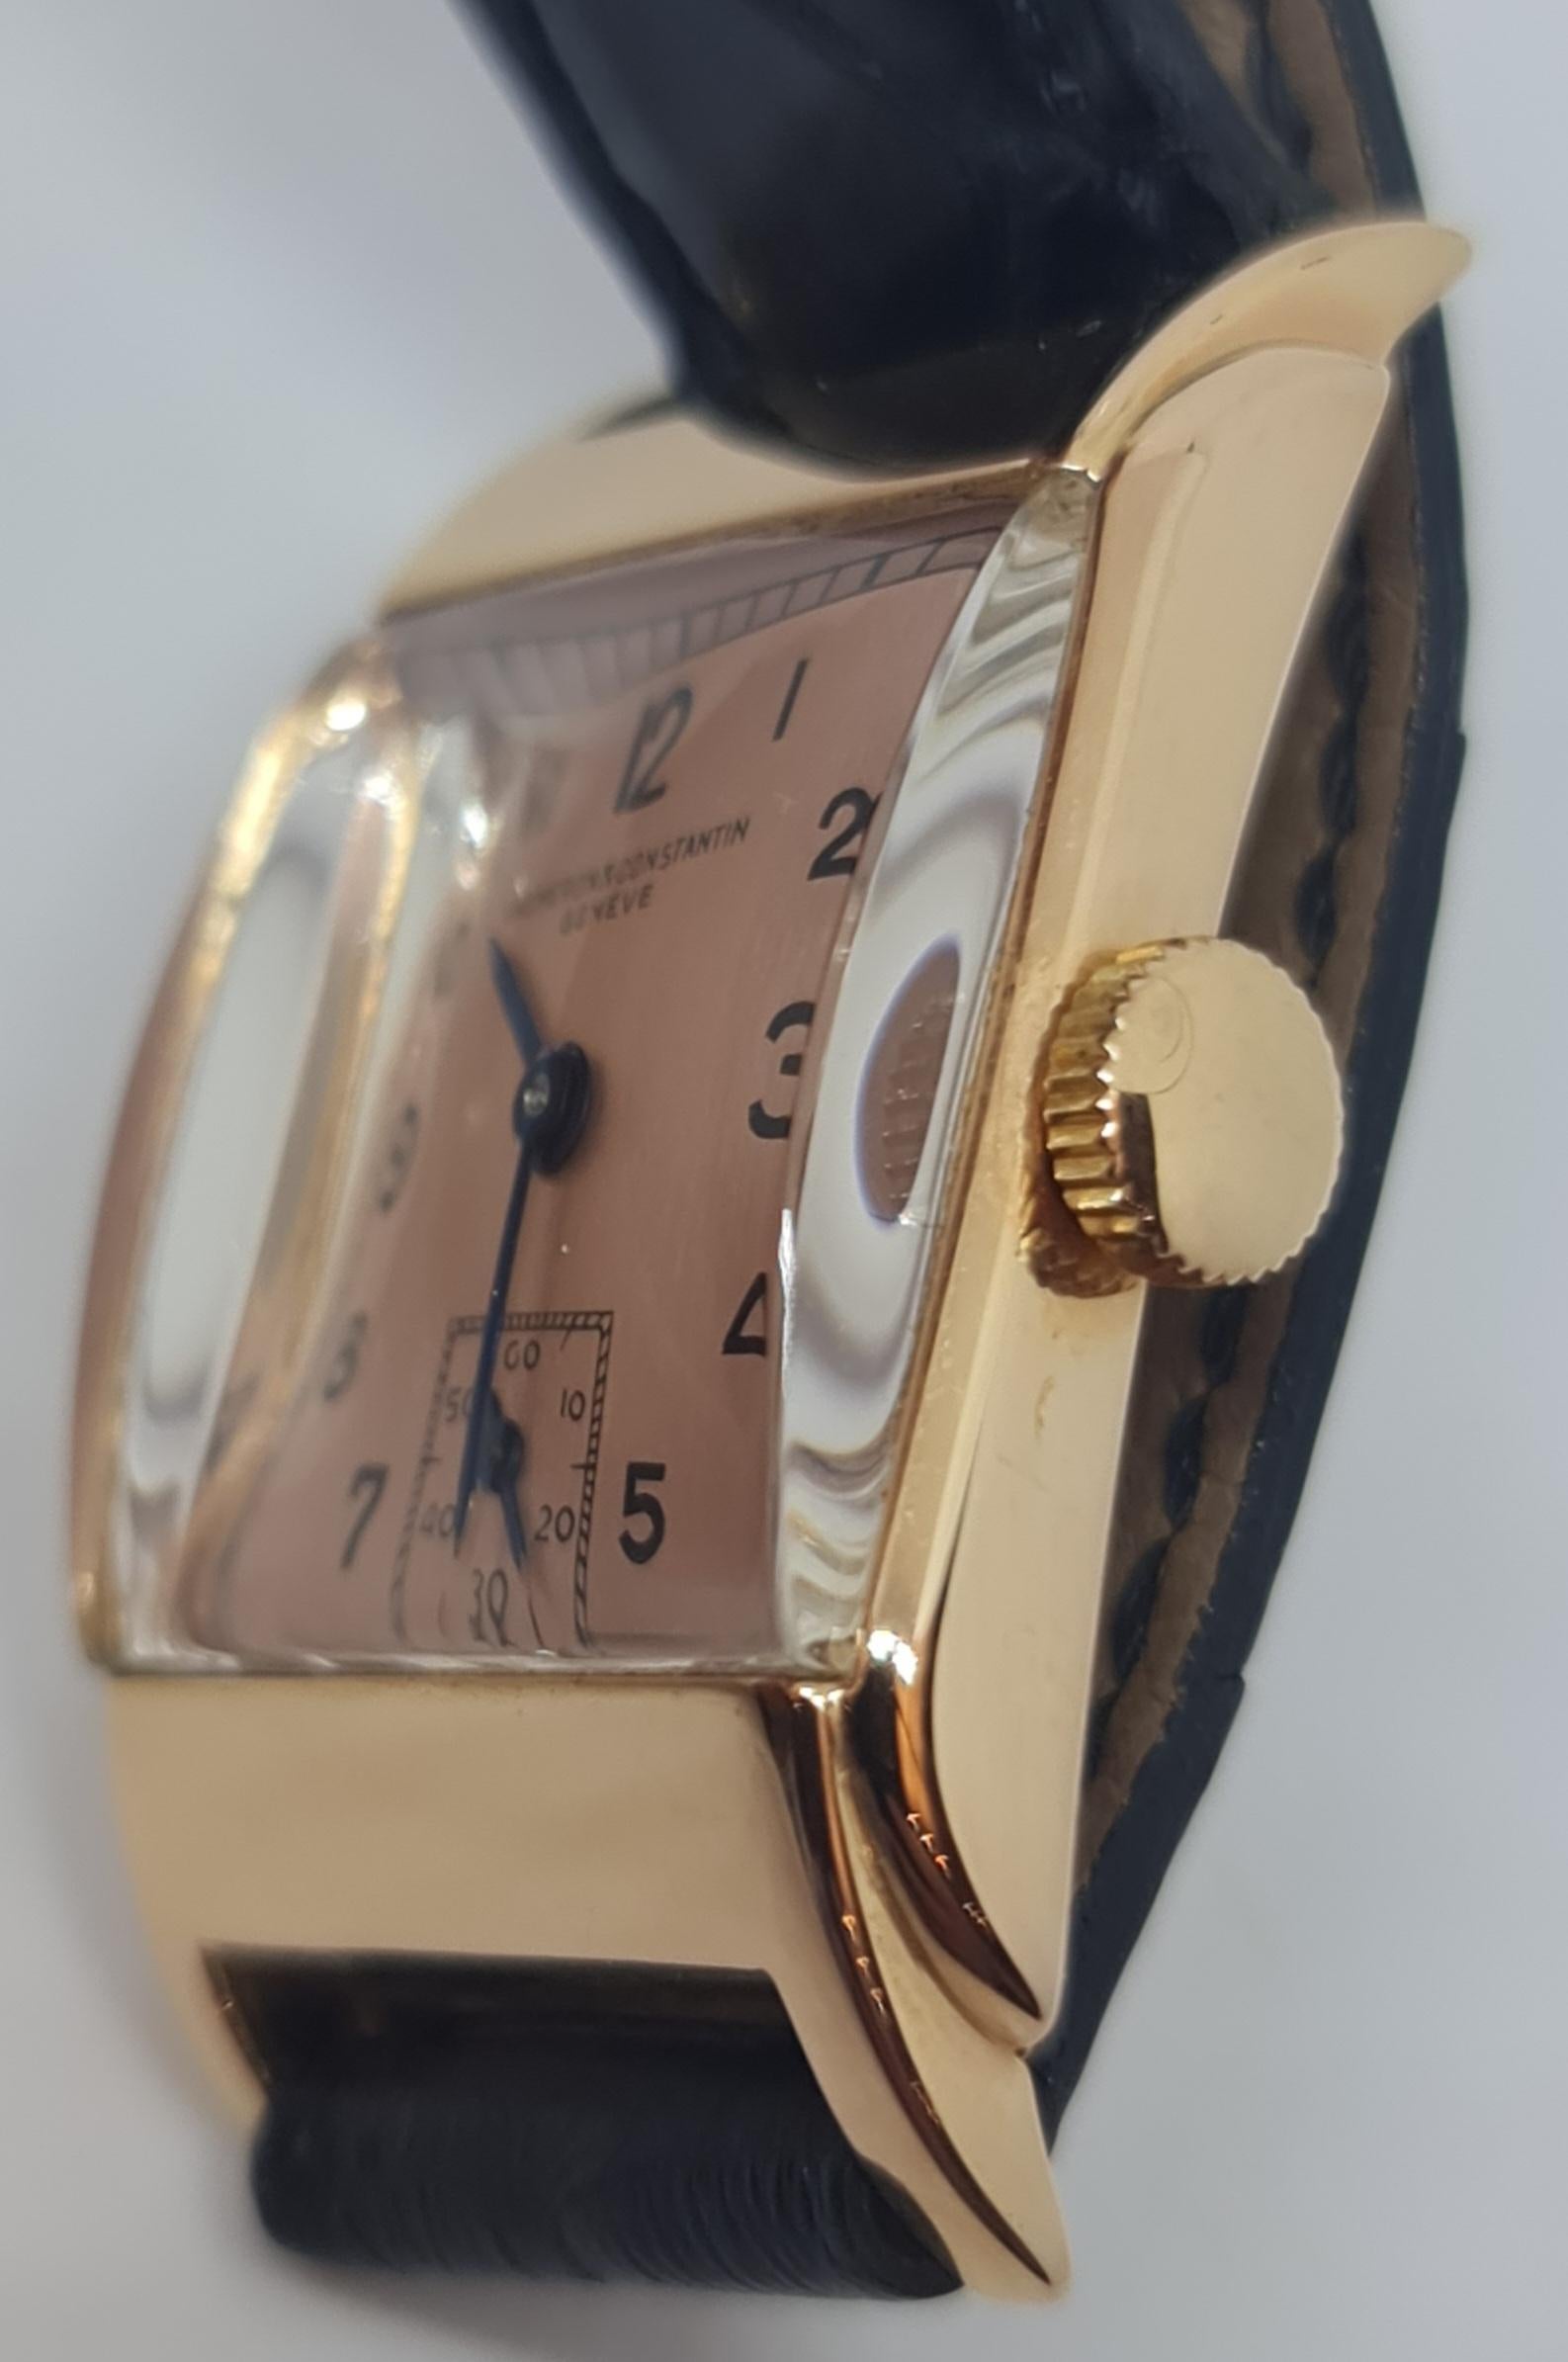 18kt Pink Gold Vacheron Constantin Manual Winding, Excellent Condition from 1935 For Sale 3